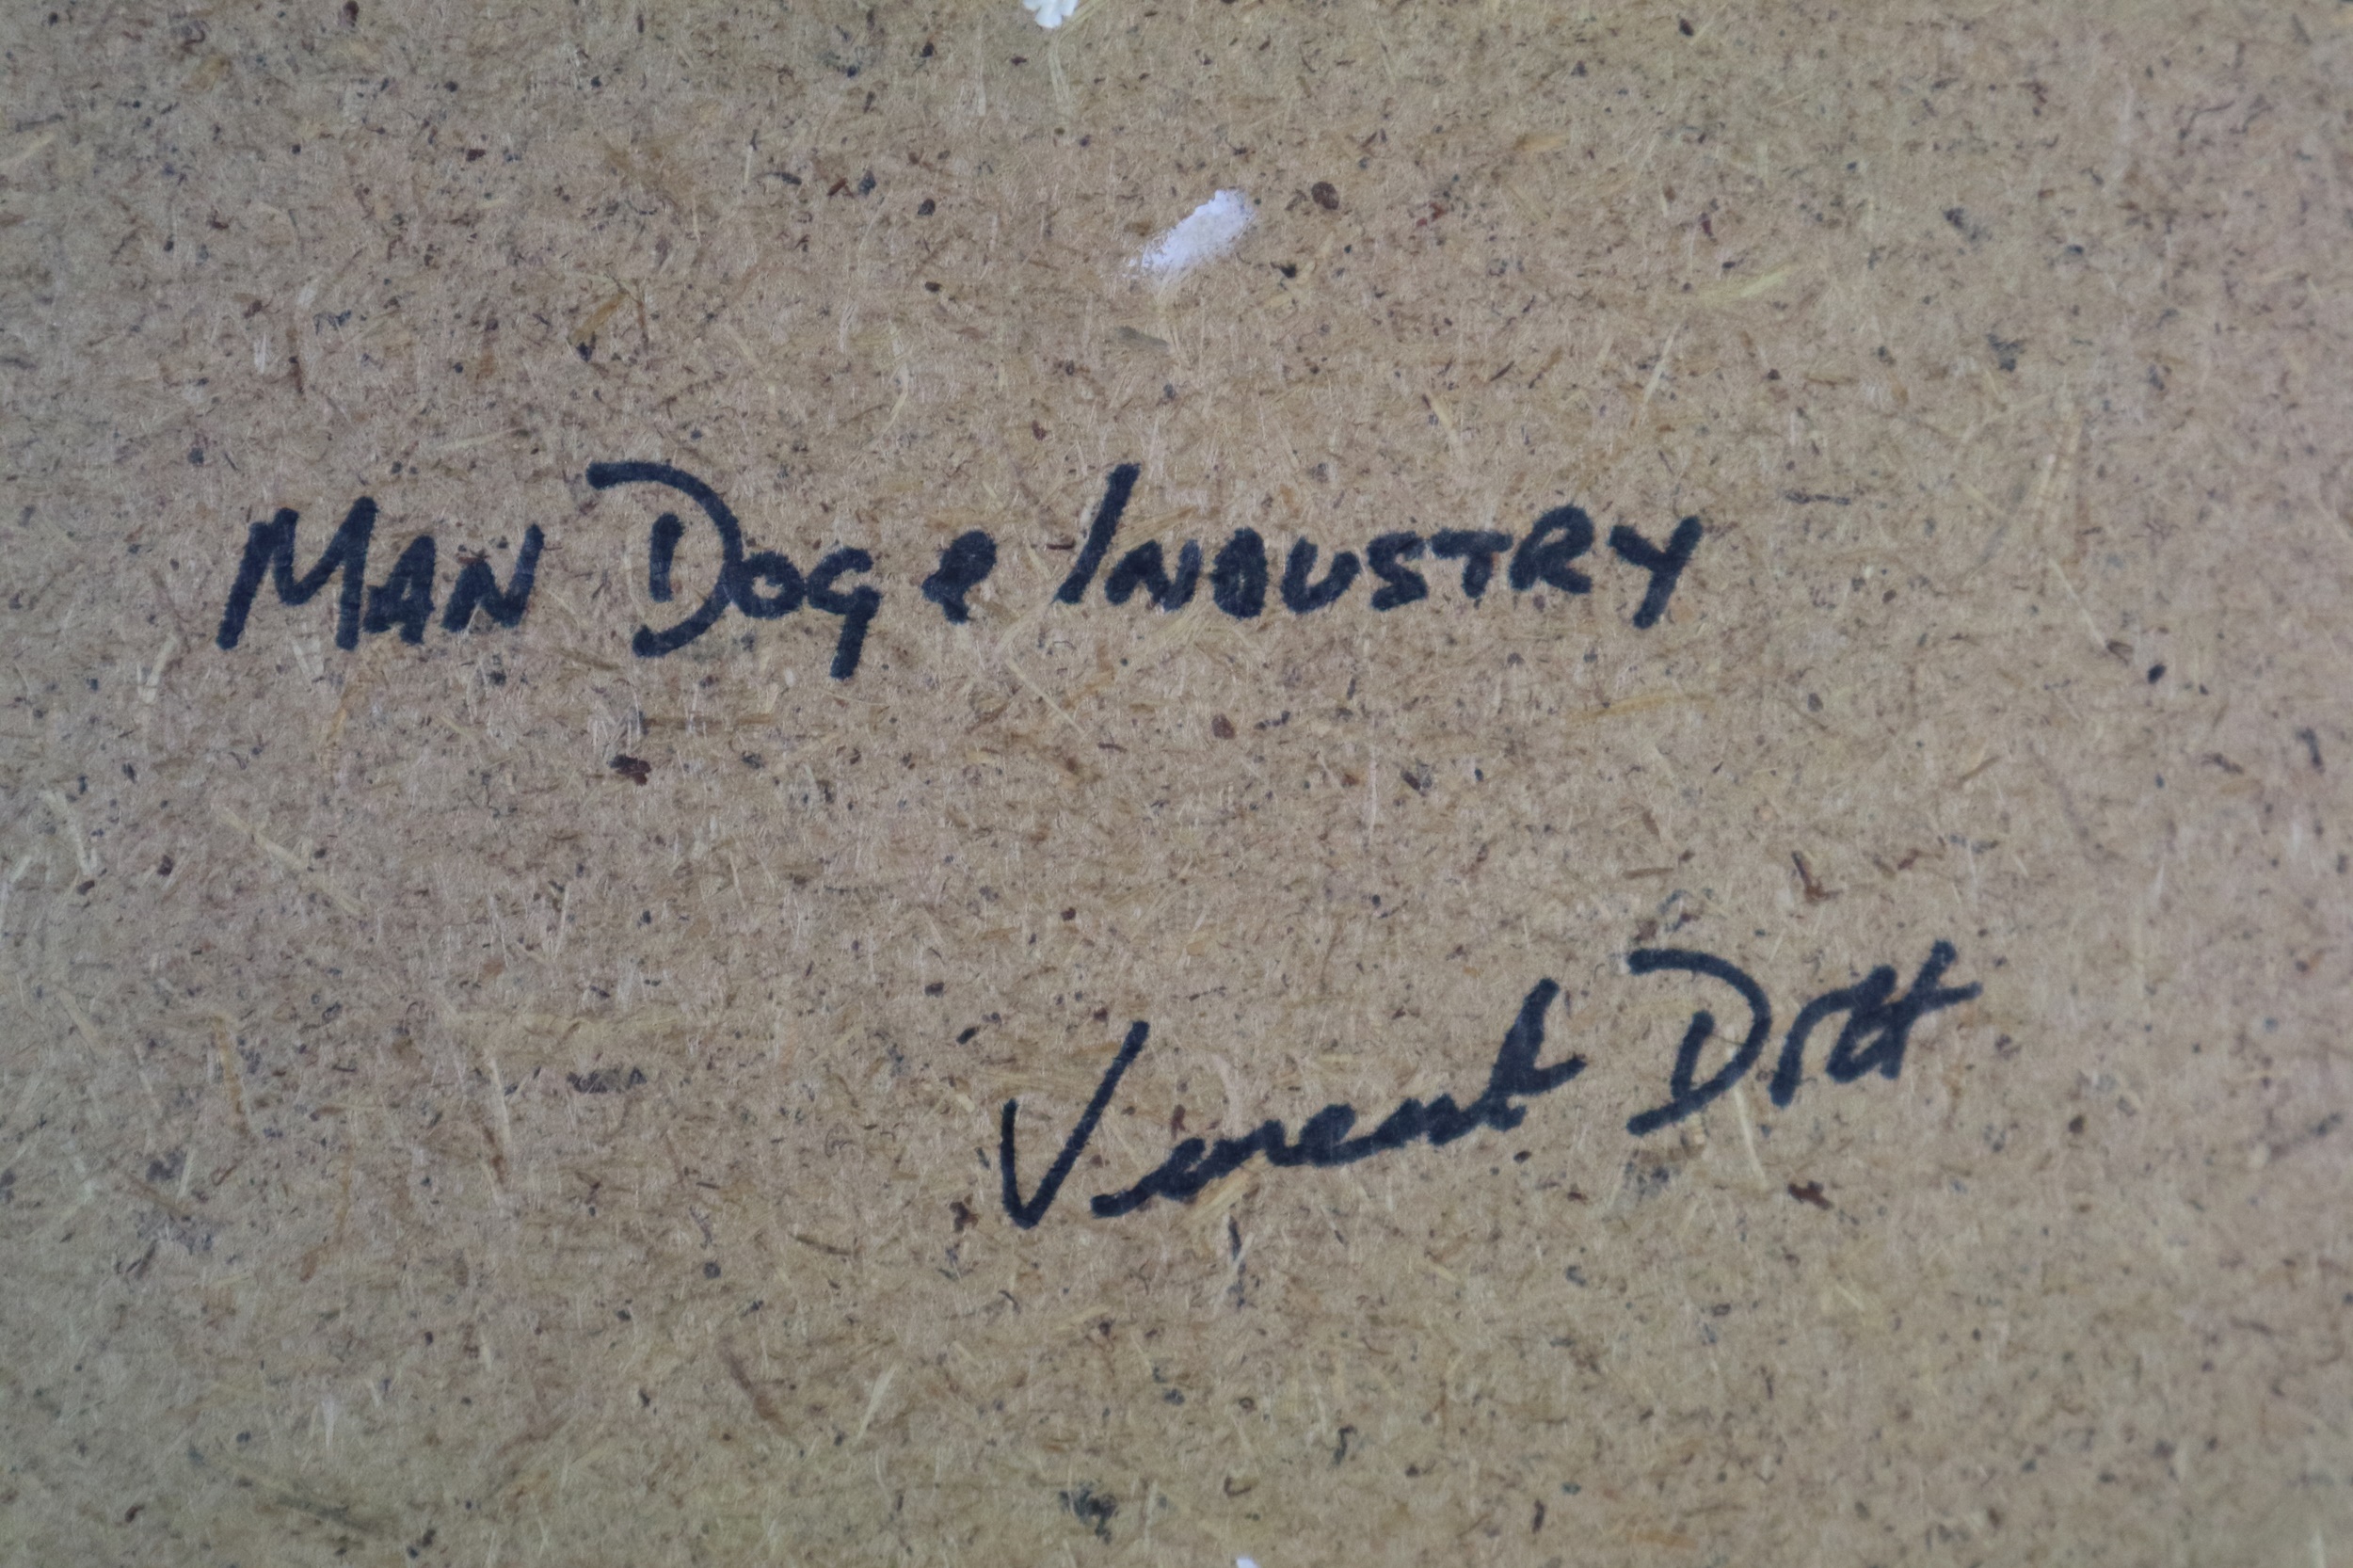 Vincent Dott (British Northern School) Man, Dog and Industry, signed lower left, titled verso, oil - Image 4 of 4